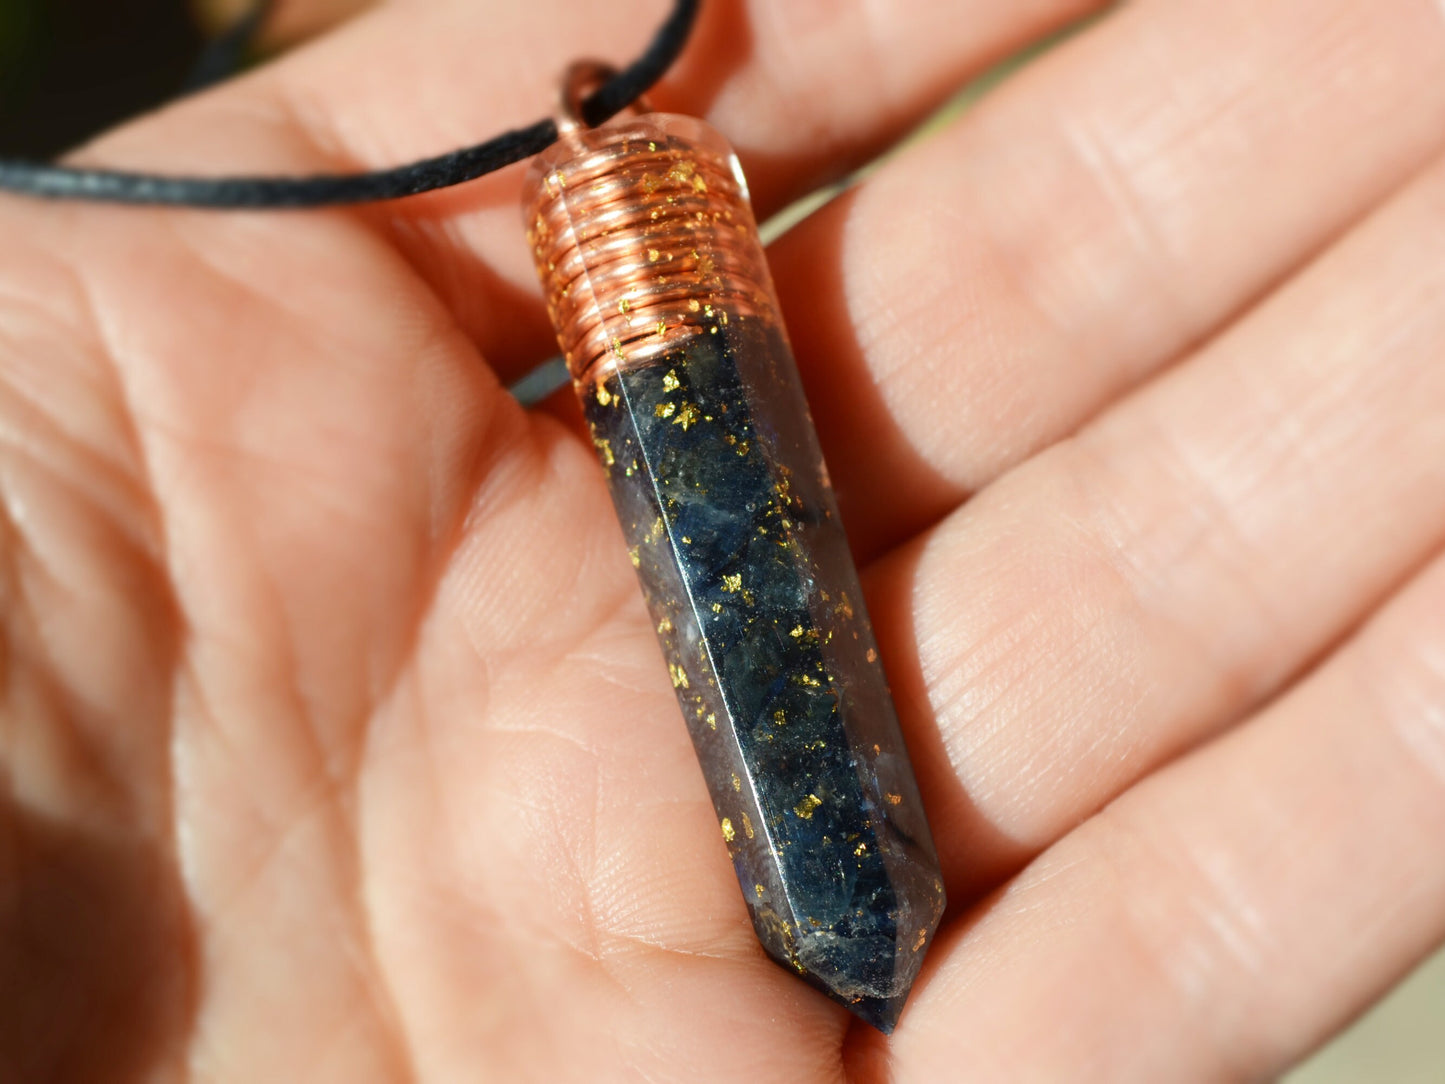 Orgonite Orgone pendant necklace - Natural Sapphire. Powerful Reiki, Magic, Alchemy amulet charm for your wishes